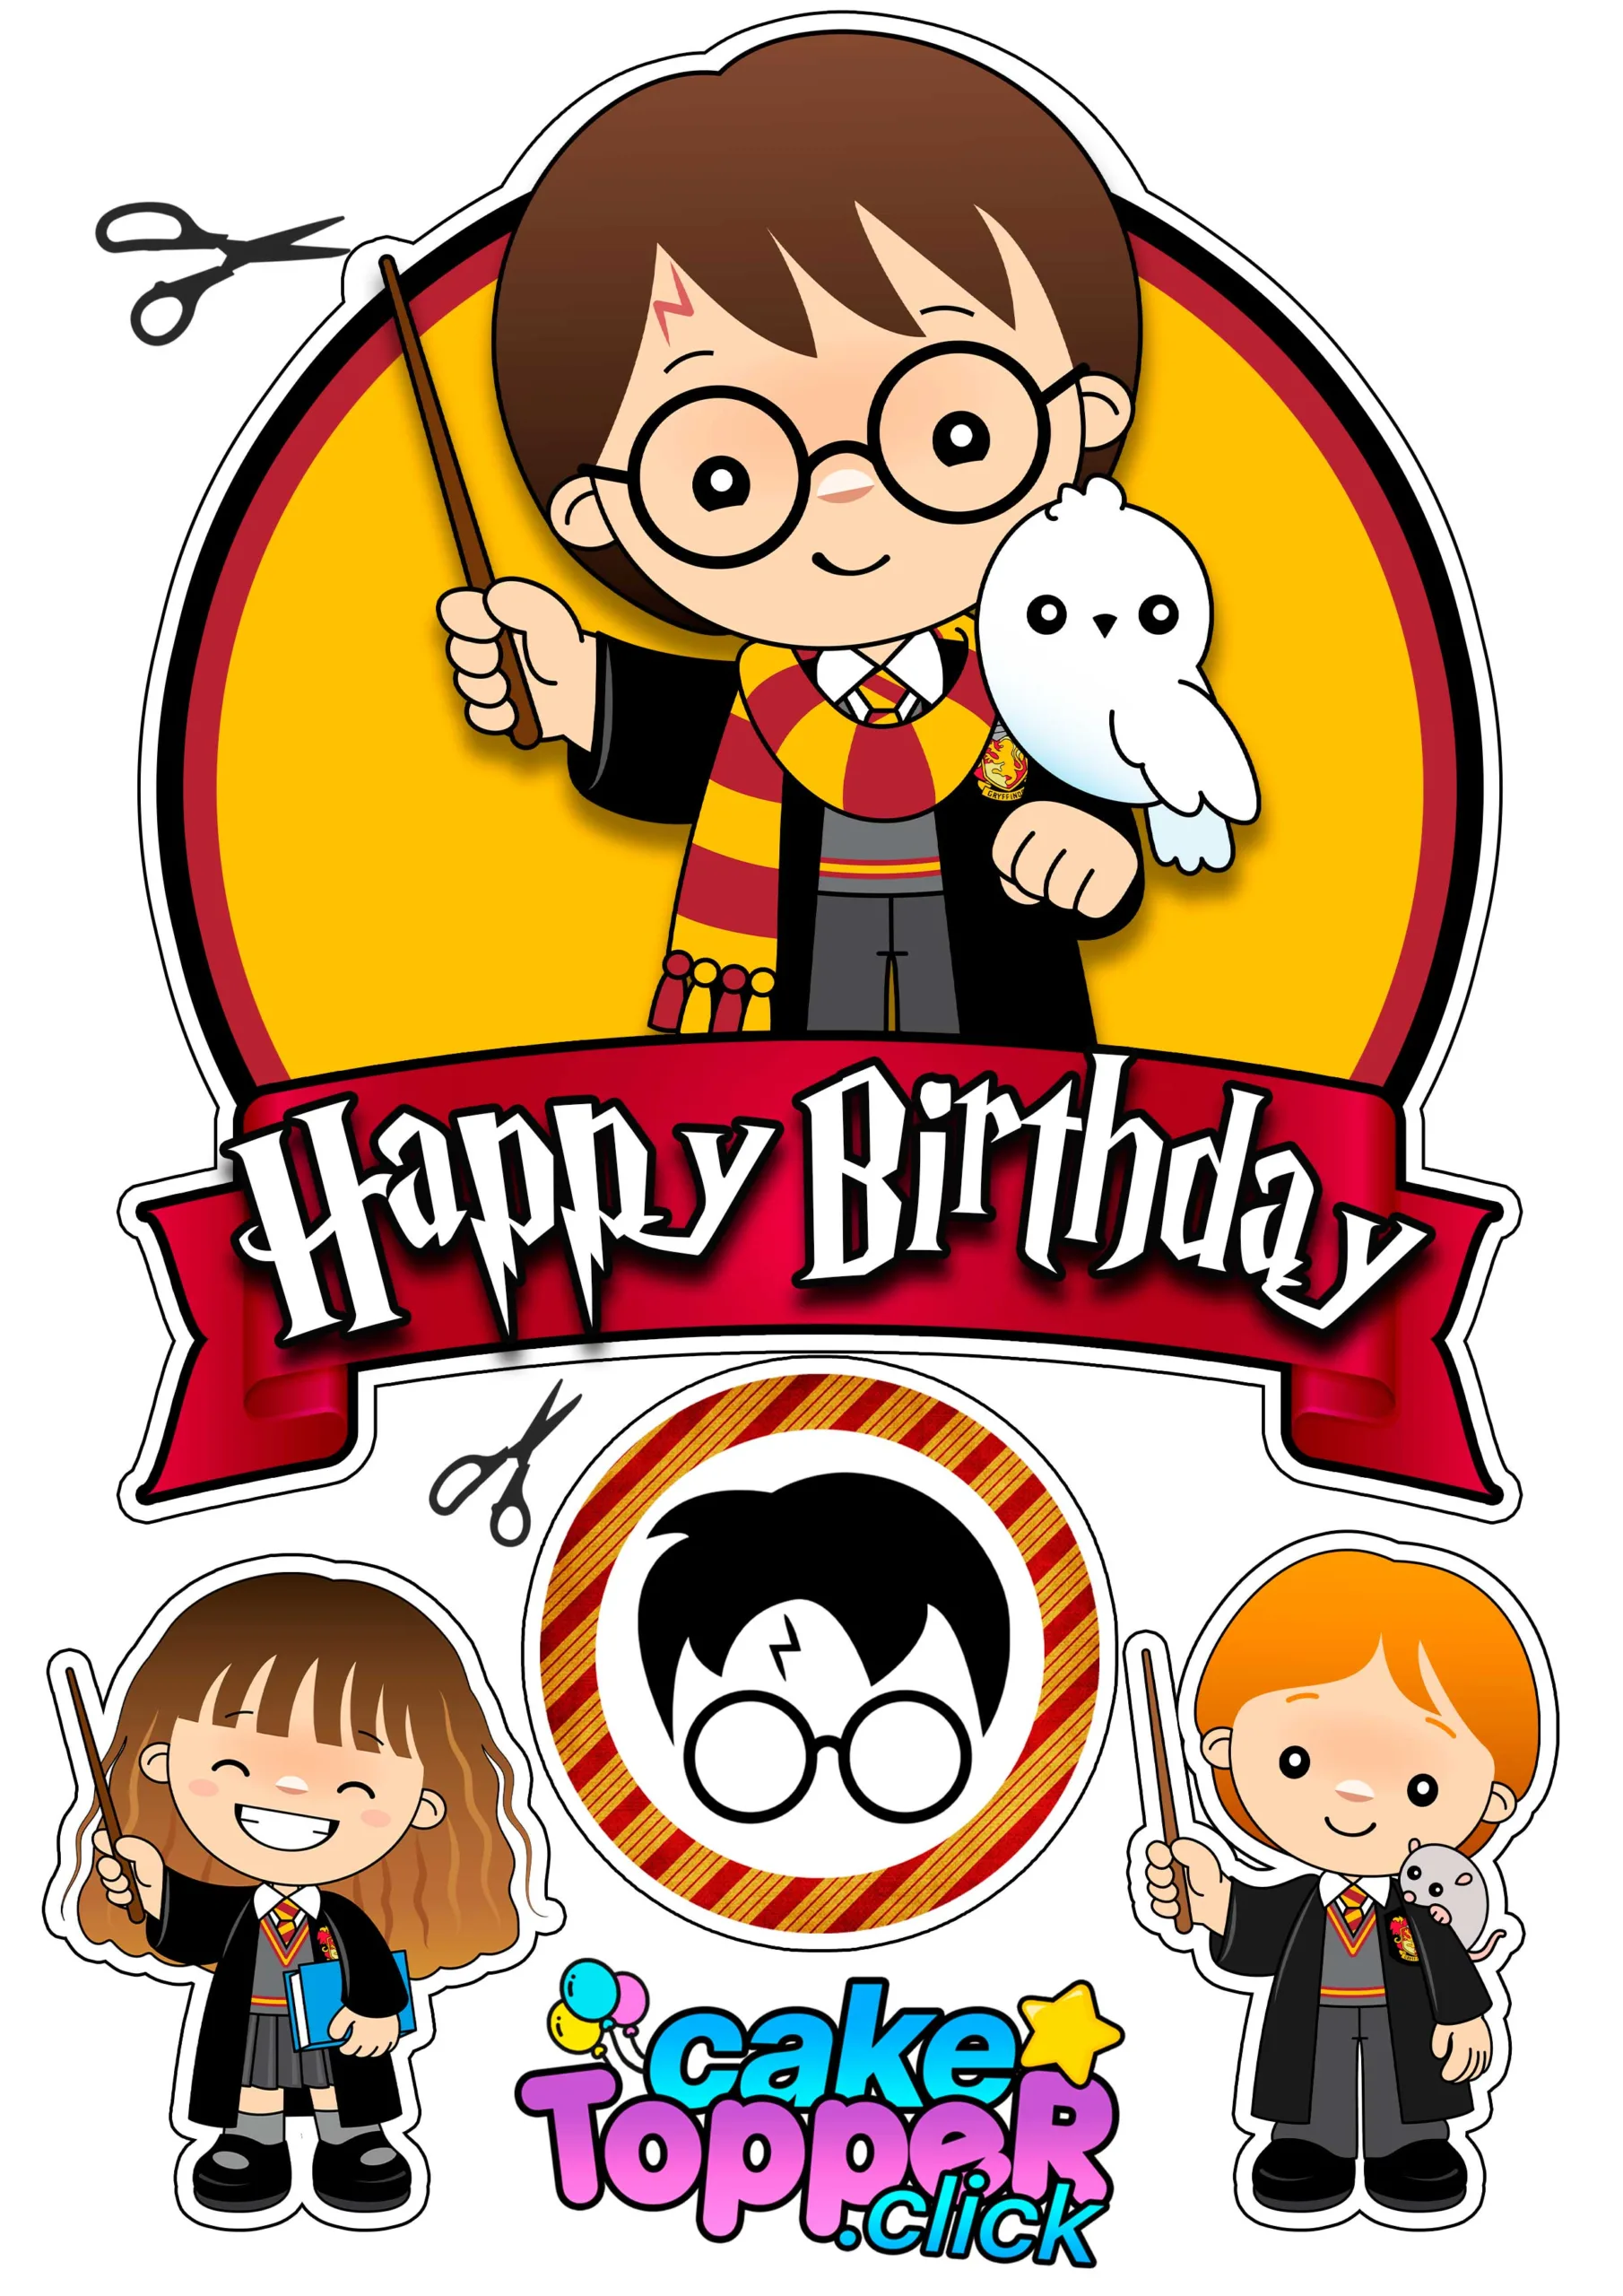 Harry Potter Toon: Free Printable Cake Toppers. - Oh My Fiesta! for Geeks